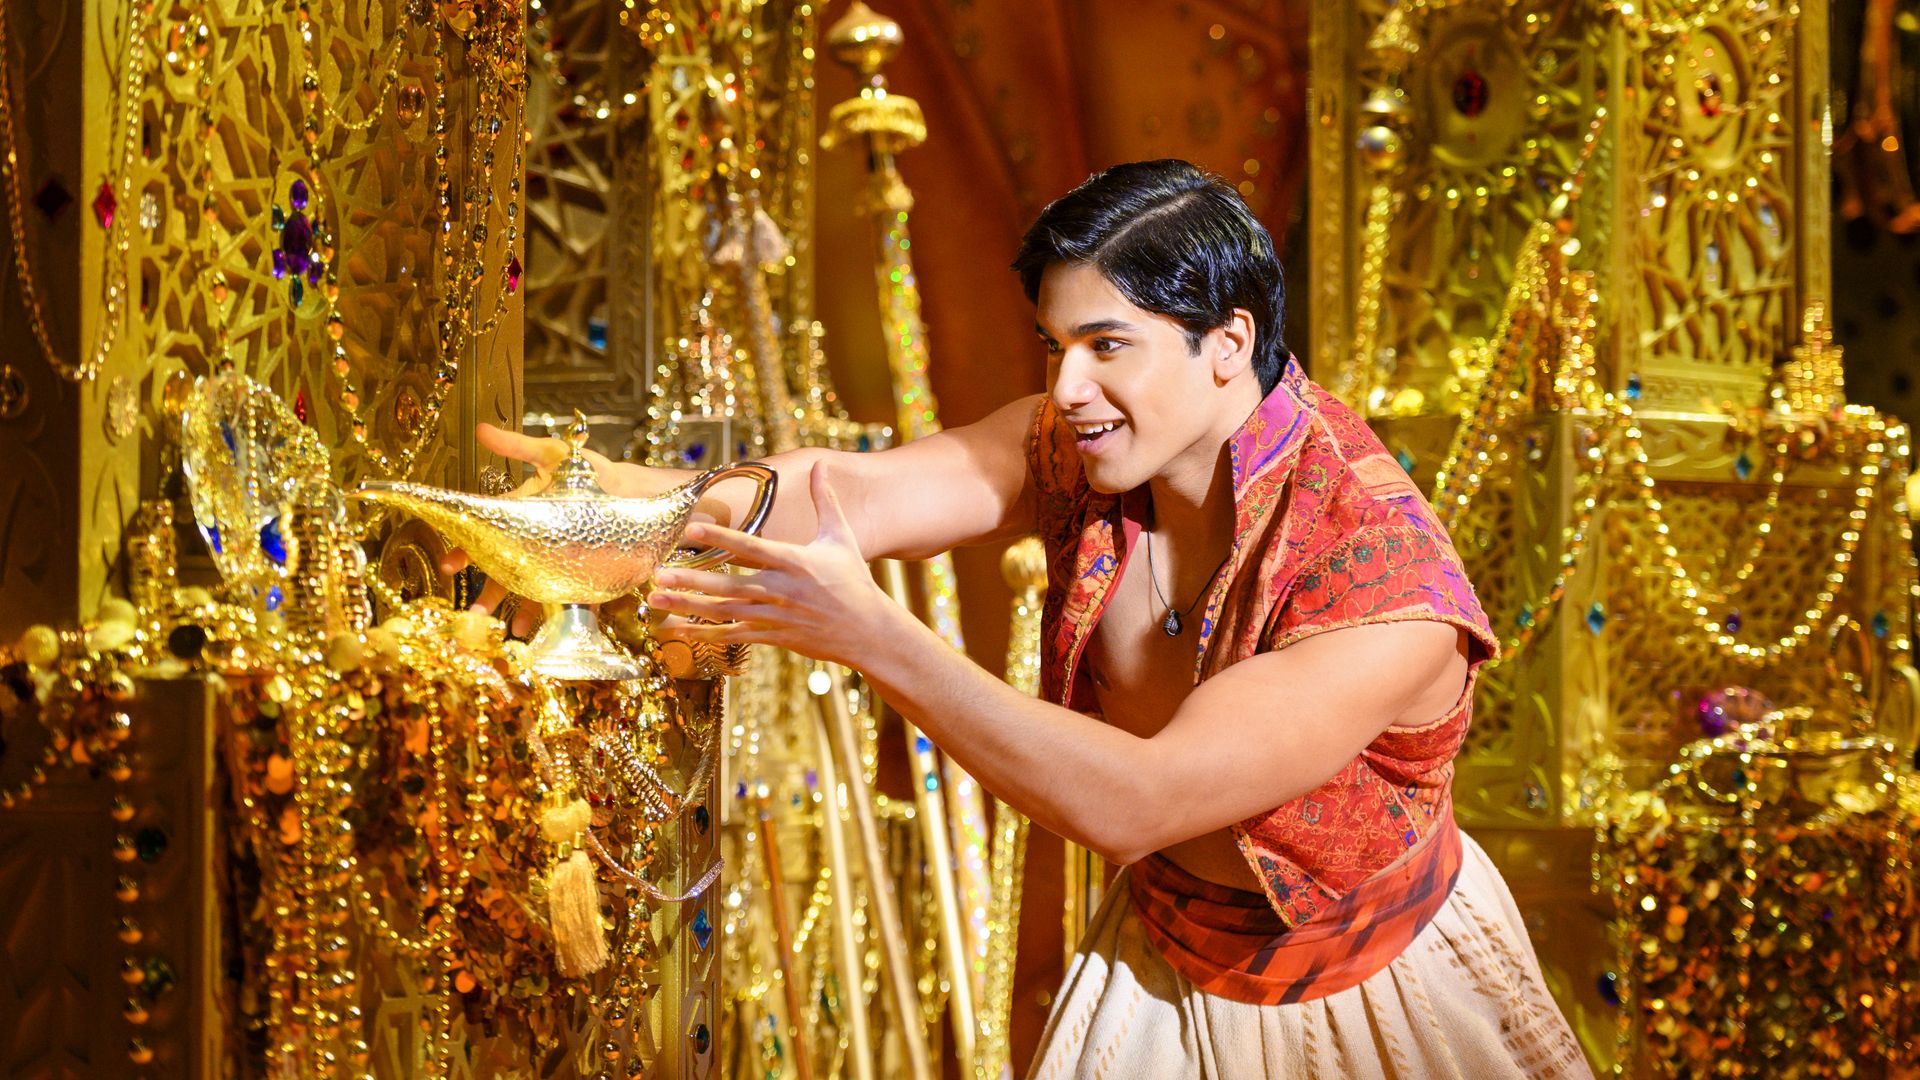 The character of Aladdin rubs a gold lamp in the Broadway musical version of Disney's "Aladdin."